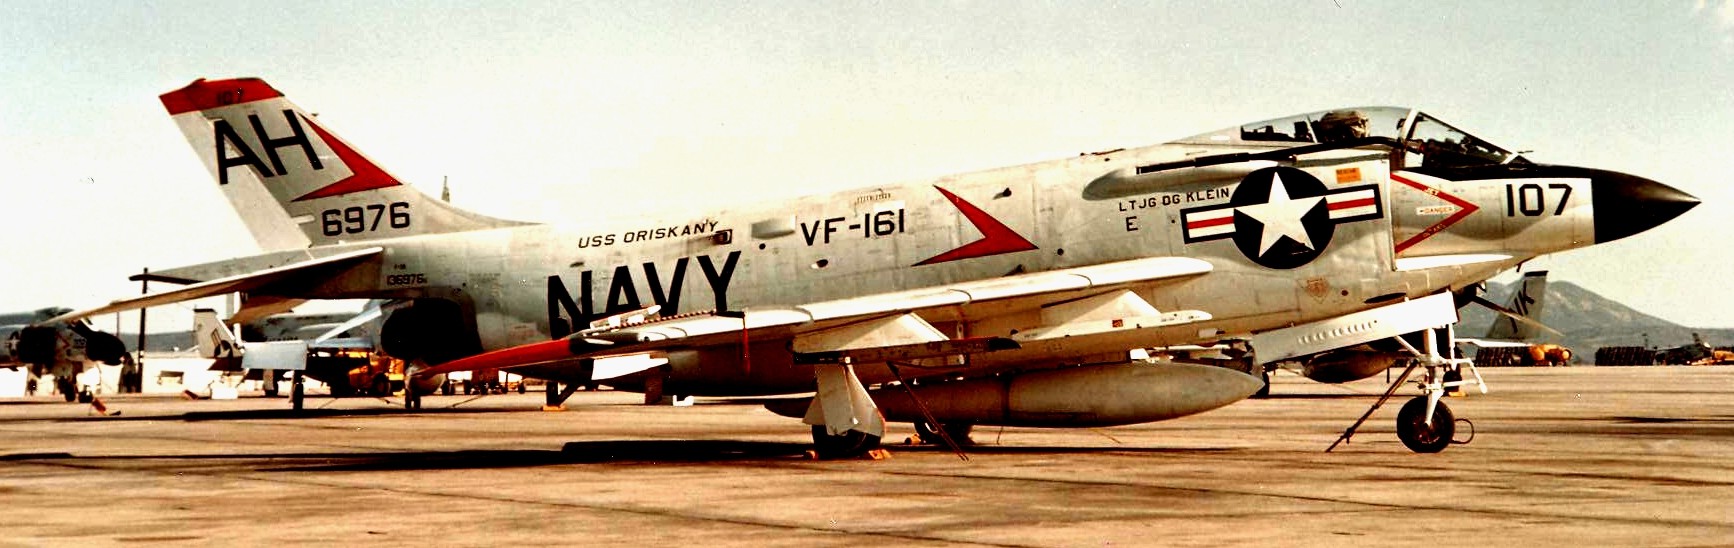 vf-161 chargers fighter squadron navy f-3b demon carrier air wing cvw-16 uss oriskany cva-34 03